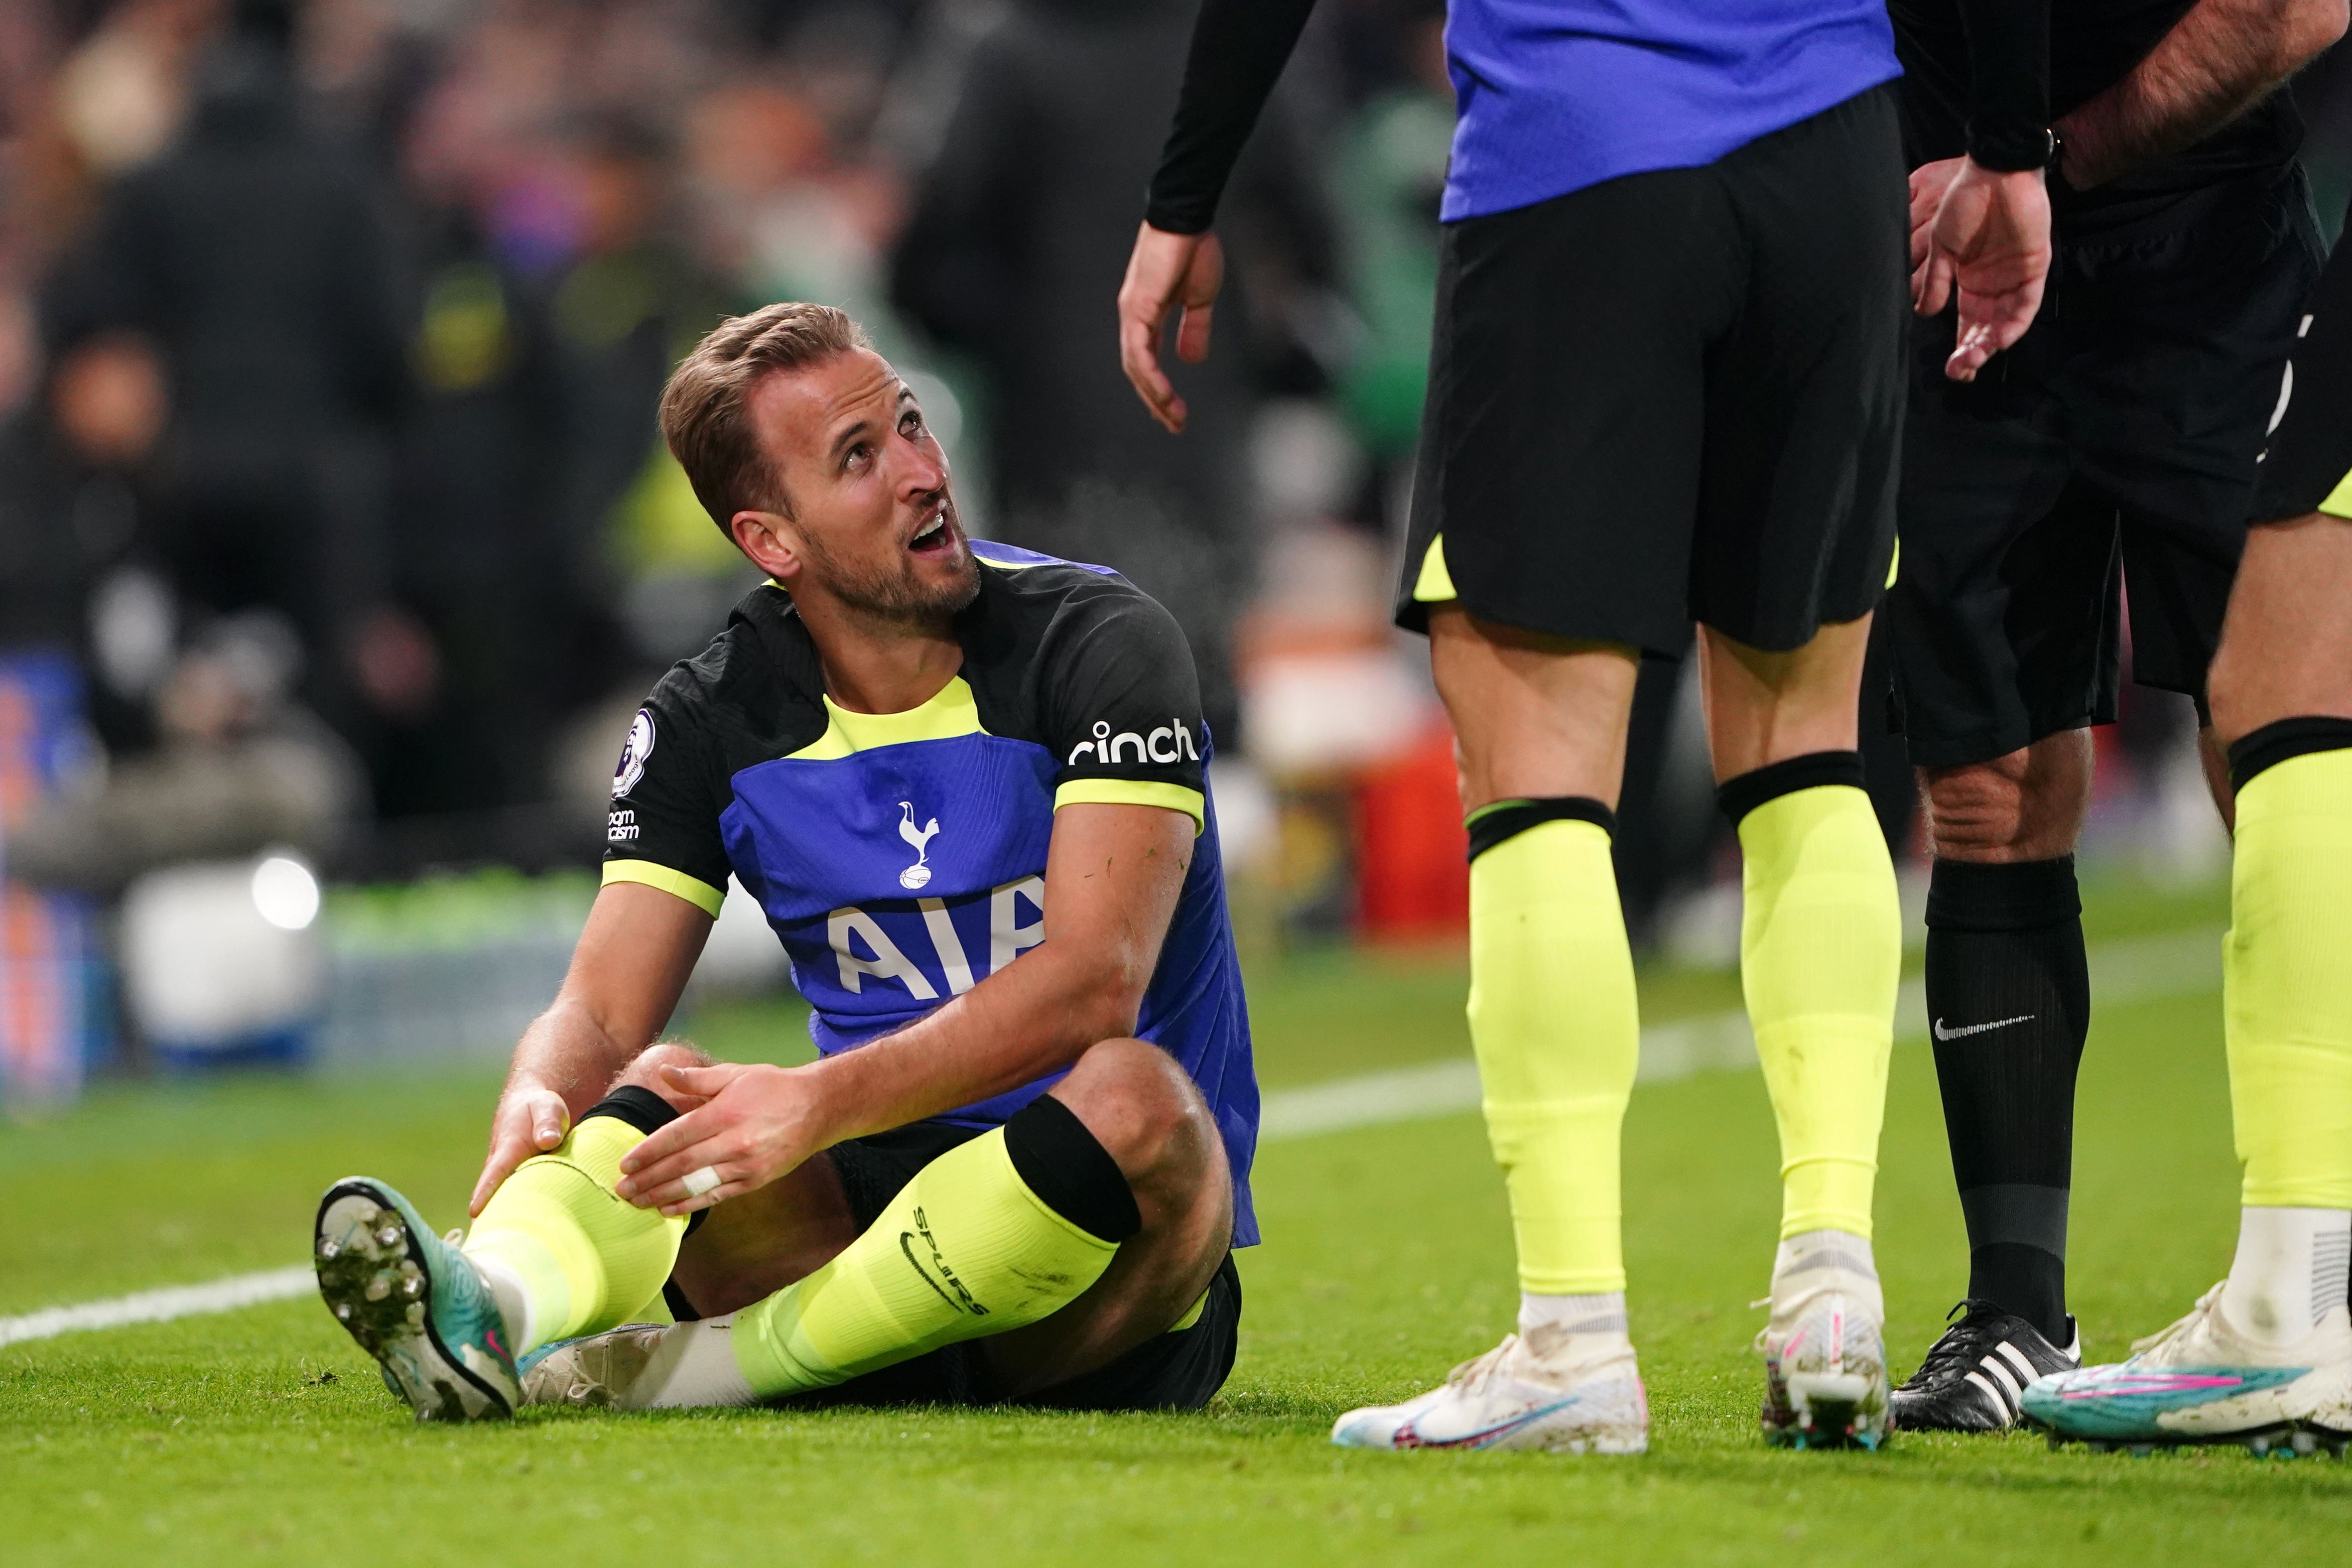 Harry Kane missed training on Wednesday and Thursday after suffering with illness this week (Zac Goodwin/PA)